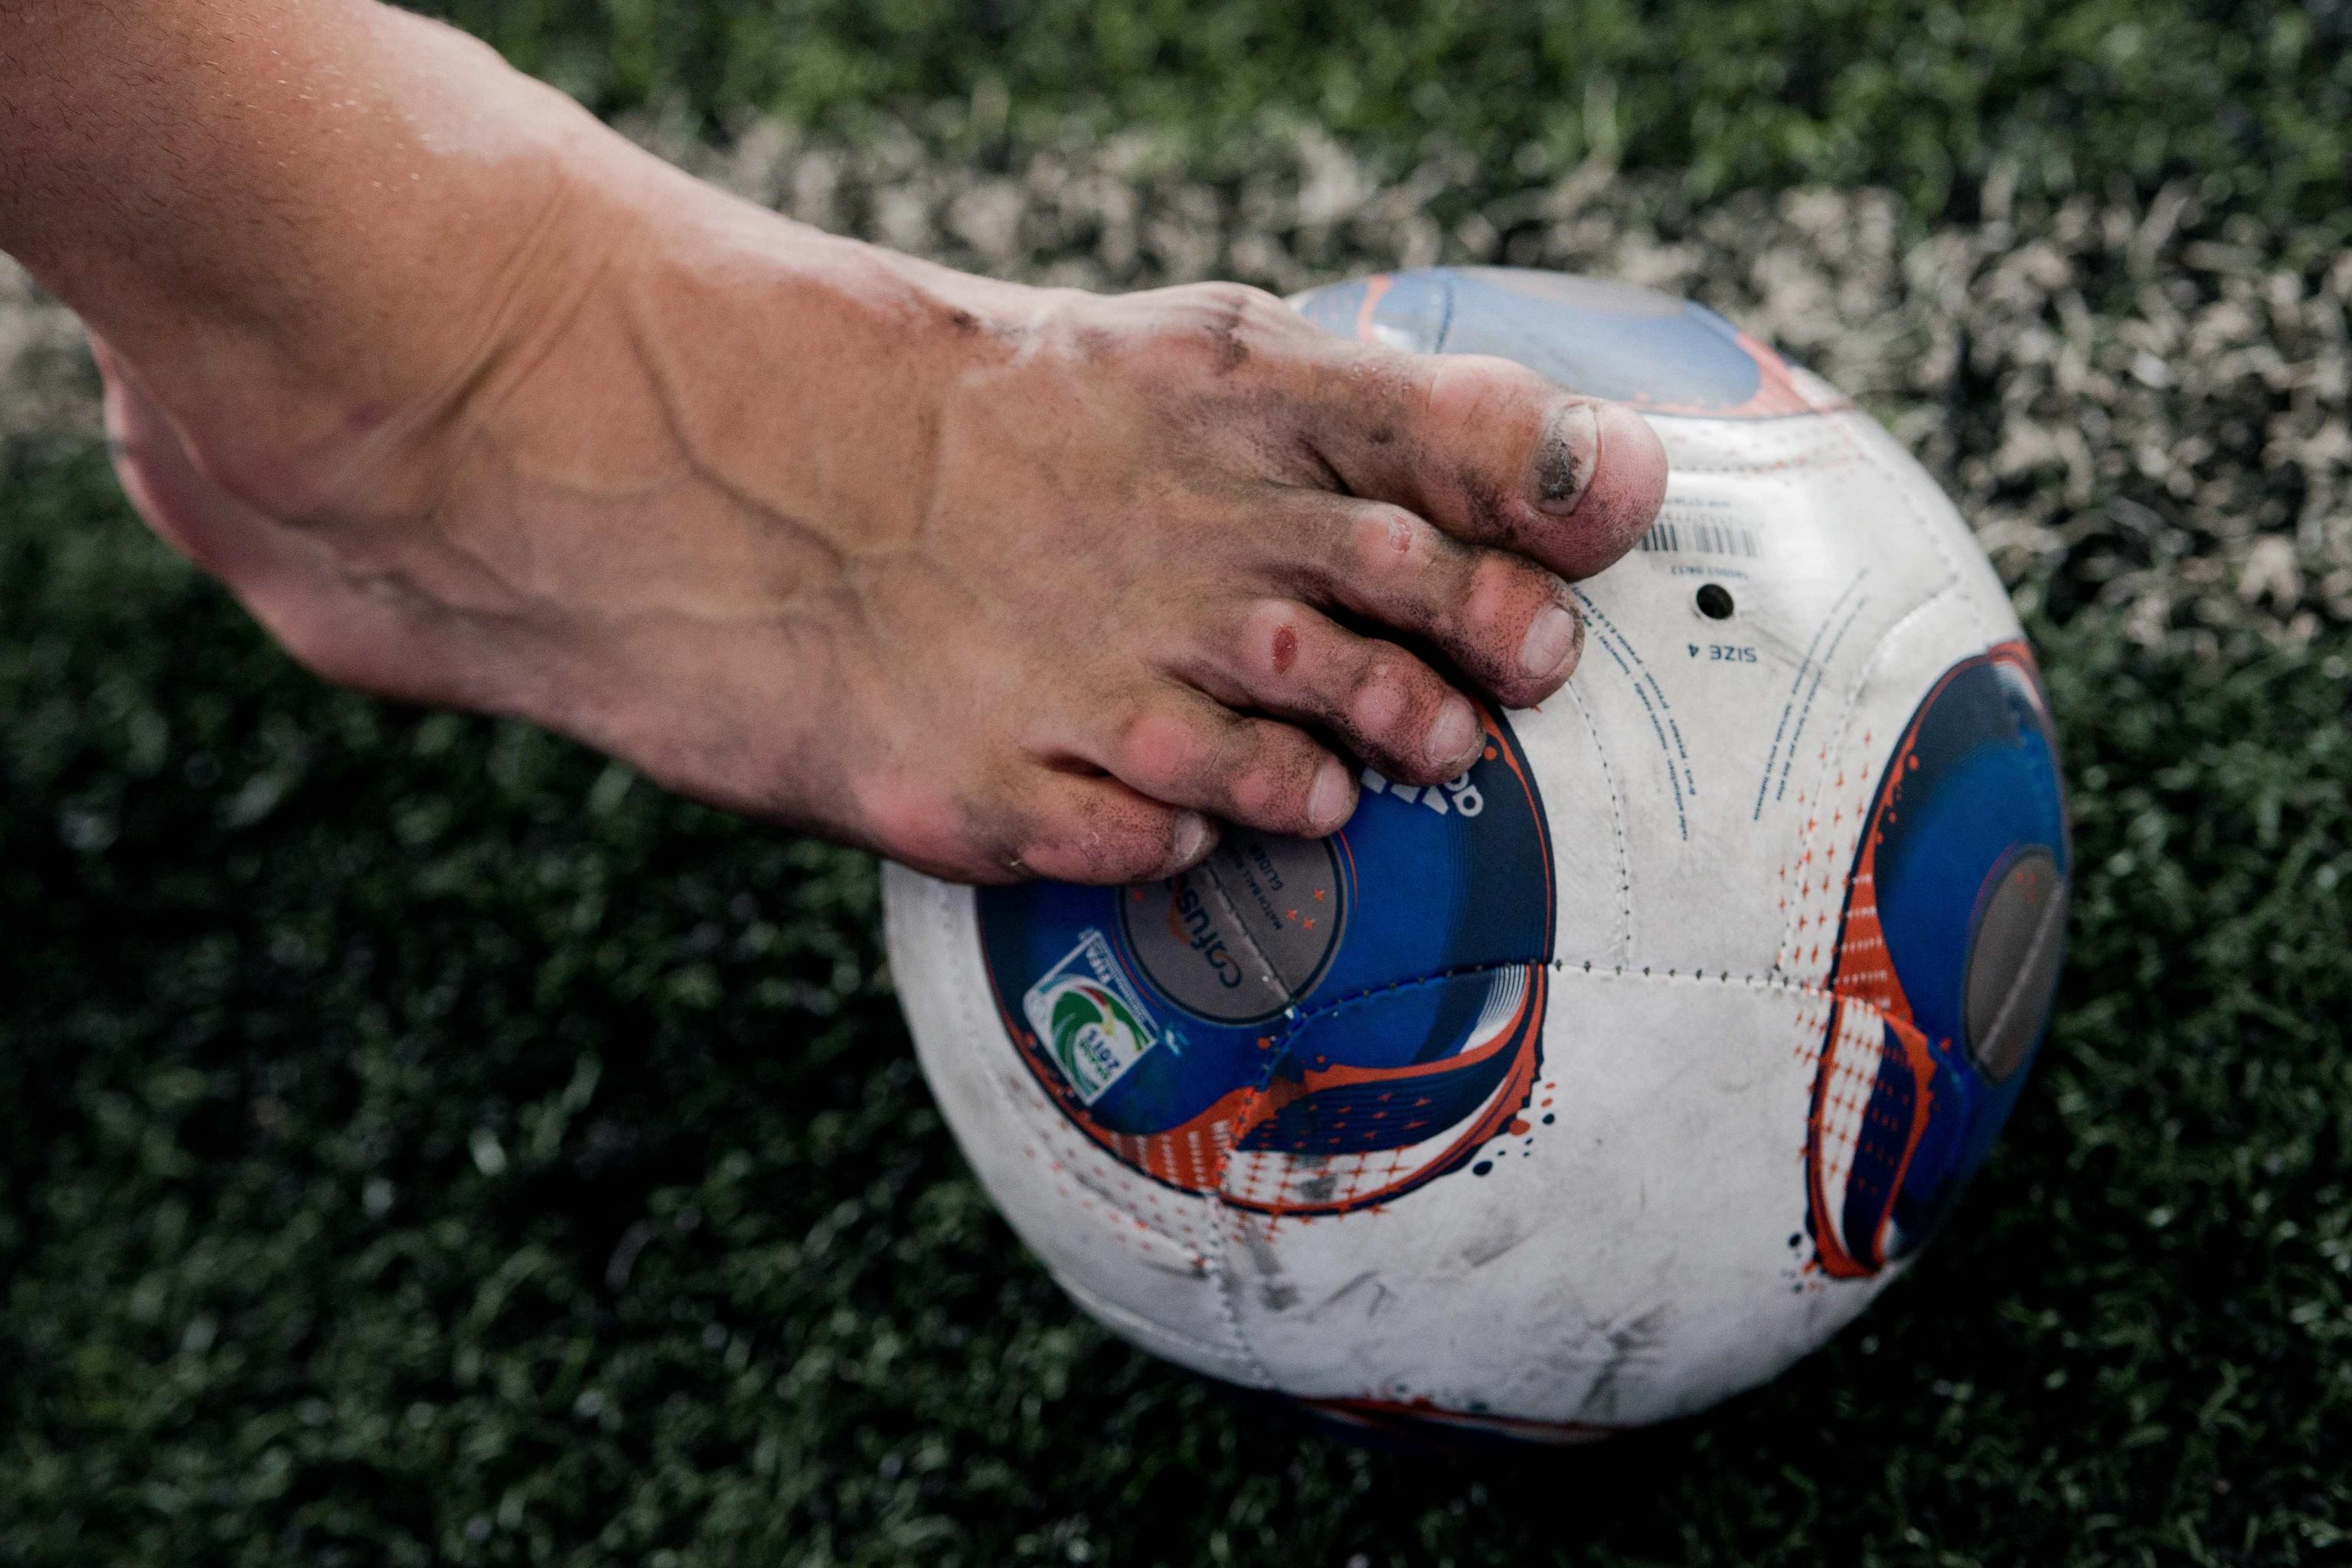 Peering Inside the World Cup's Brazuca Ball